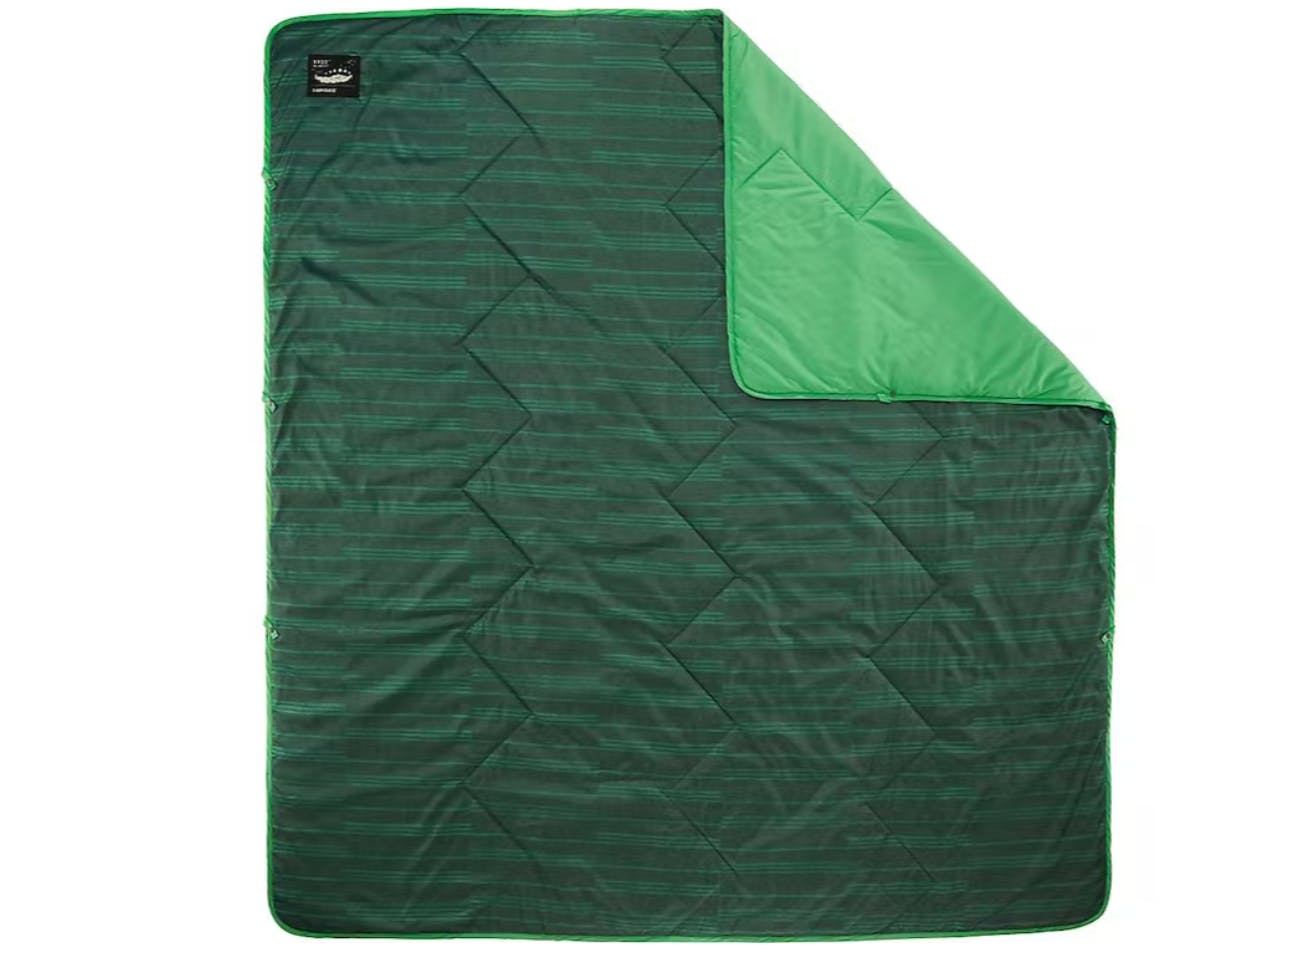 The Therm-a-Rest Argo Blanket.